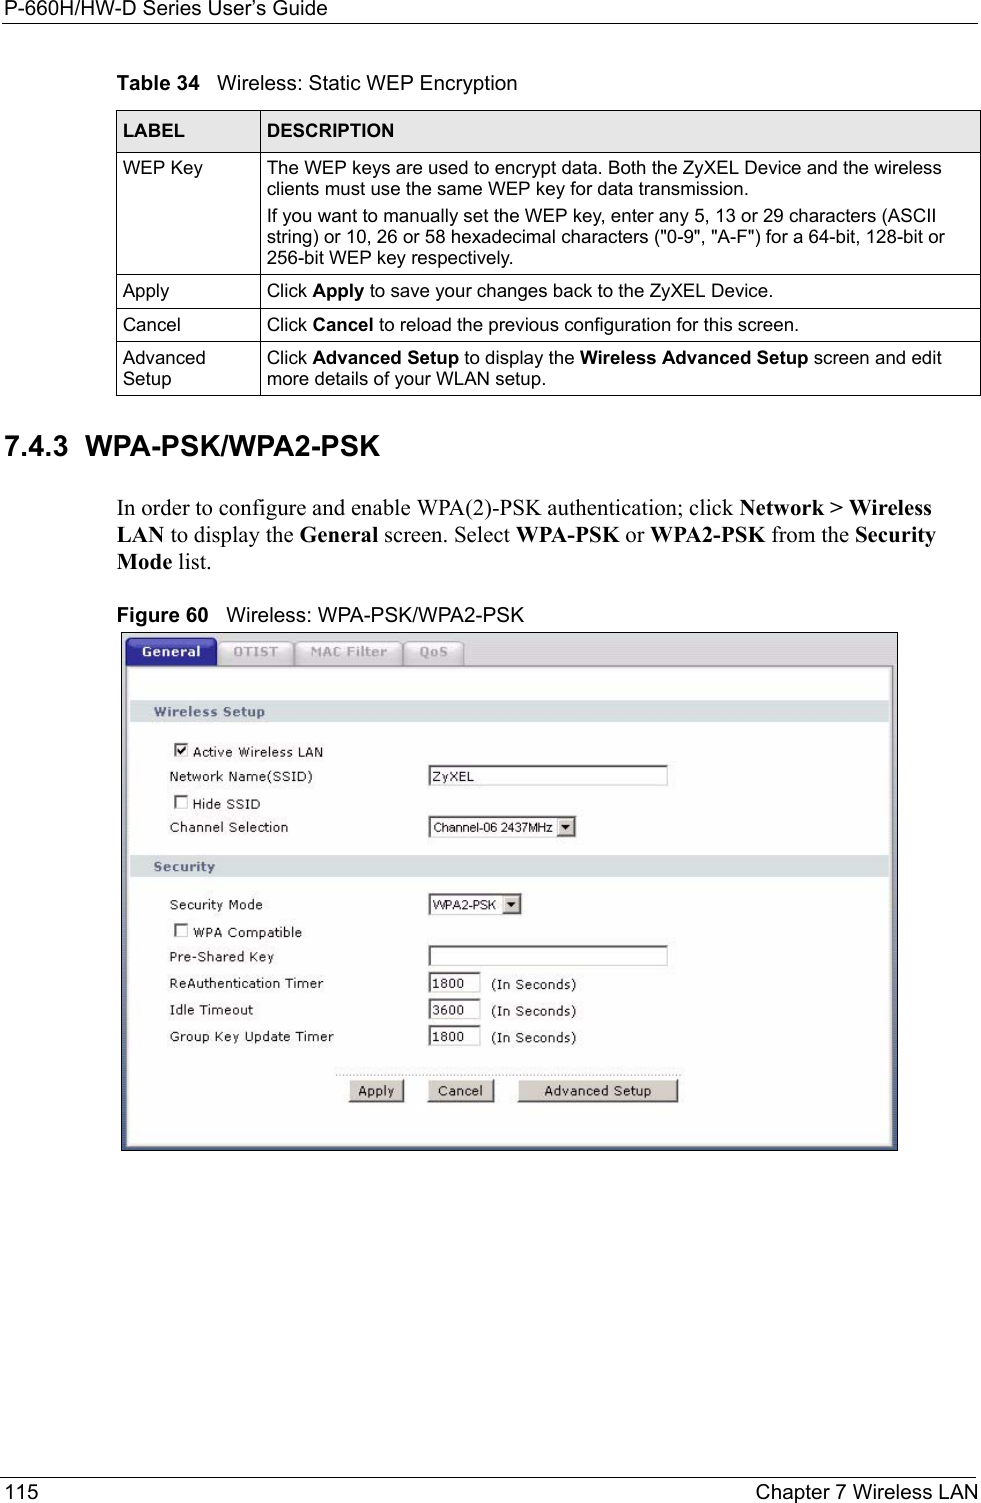 P-660H/HW-D Series User’s Guide115 Chapter 7 Wireless LAN7.4.3  WPA-PSK/WPA2-PSK In order to configure and enable WPA(2)-PSK authentication; click Network &gt; Wireless LAN to display the General screen. Select WPA-PSK or WPA2-PSK from the Security Mode list.Figure 60   Wireless: WPA-PSK/WPA2-PSKWEP Key The WEP keys are used to encrypt data. Both the ZyXEL Device and the wireless clients must use the same WEP key for data transmission.If you want to manually set the WEP key, enter any 5, 13 or 29 characters (ASCII string) or 10, 26 or 58 hexadecimal characters (&quot;0-9&quot;, &quot;A-F&quot;) for a 64-bit, 128-bit or 256-bit WEP key respectively.Apply Click Apply to save your changes back to the ZyXEL Device.Cancel Click Cancel to reload the previous configuration for this screen.Advanced SetupClick Advanced Setup to display the Wireless Advanced Setup screen and edit more details of your WLAN setup.Table 34   Wireless: Static WEP EncryptionLABEL DESCRIPTION